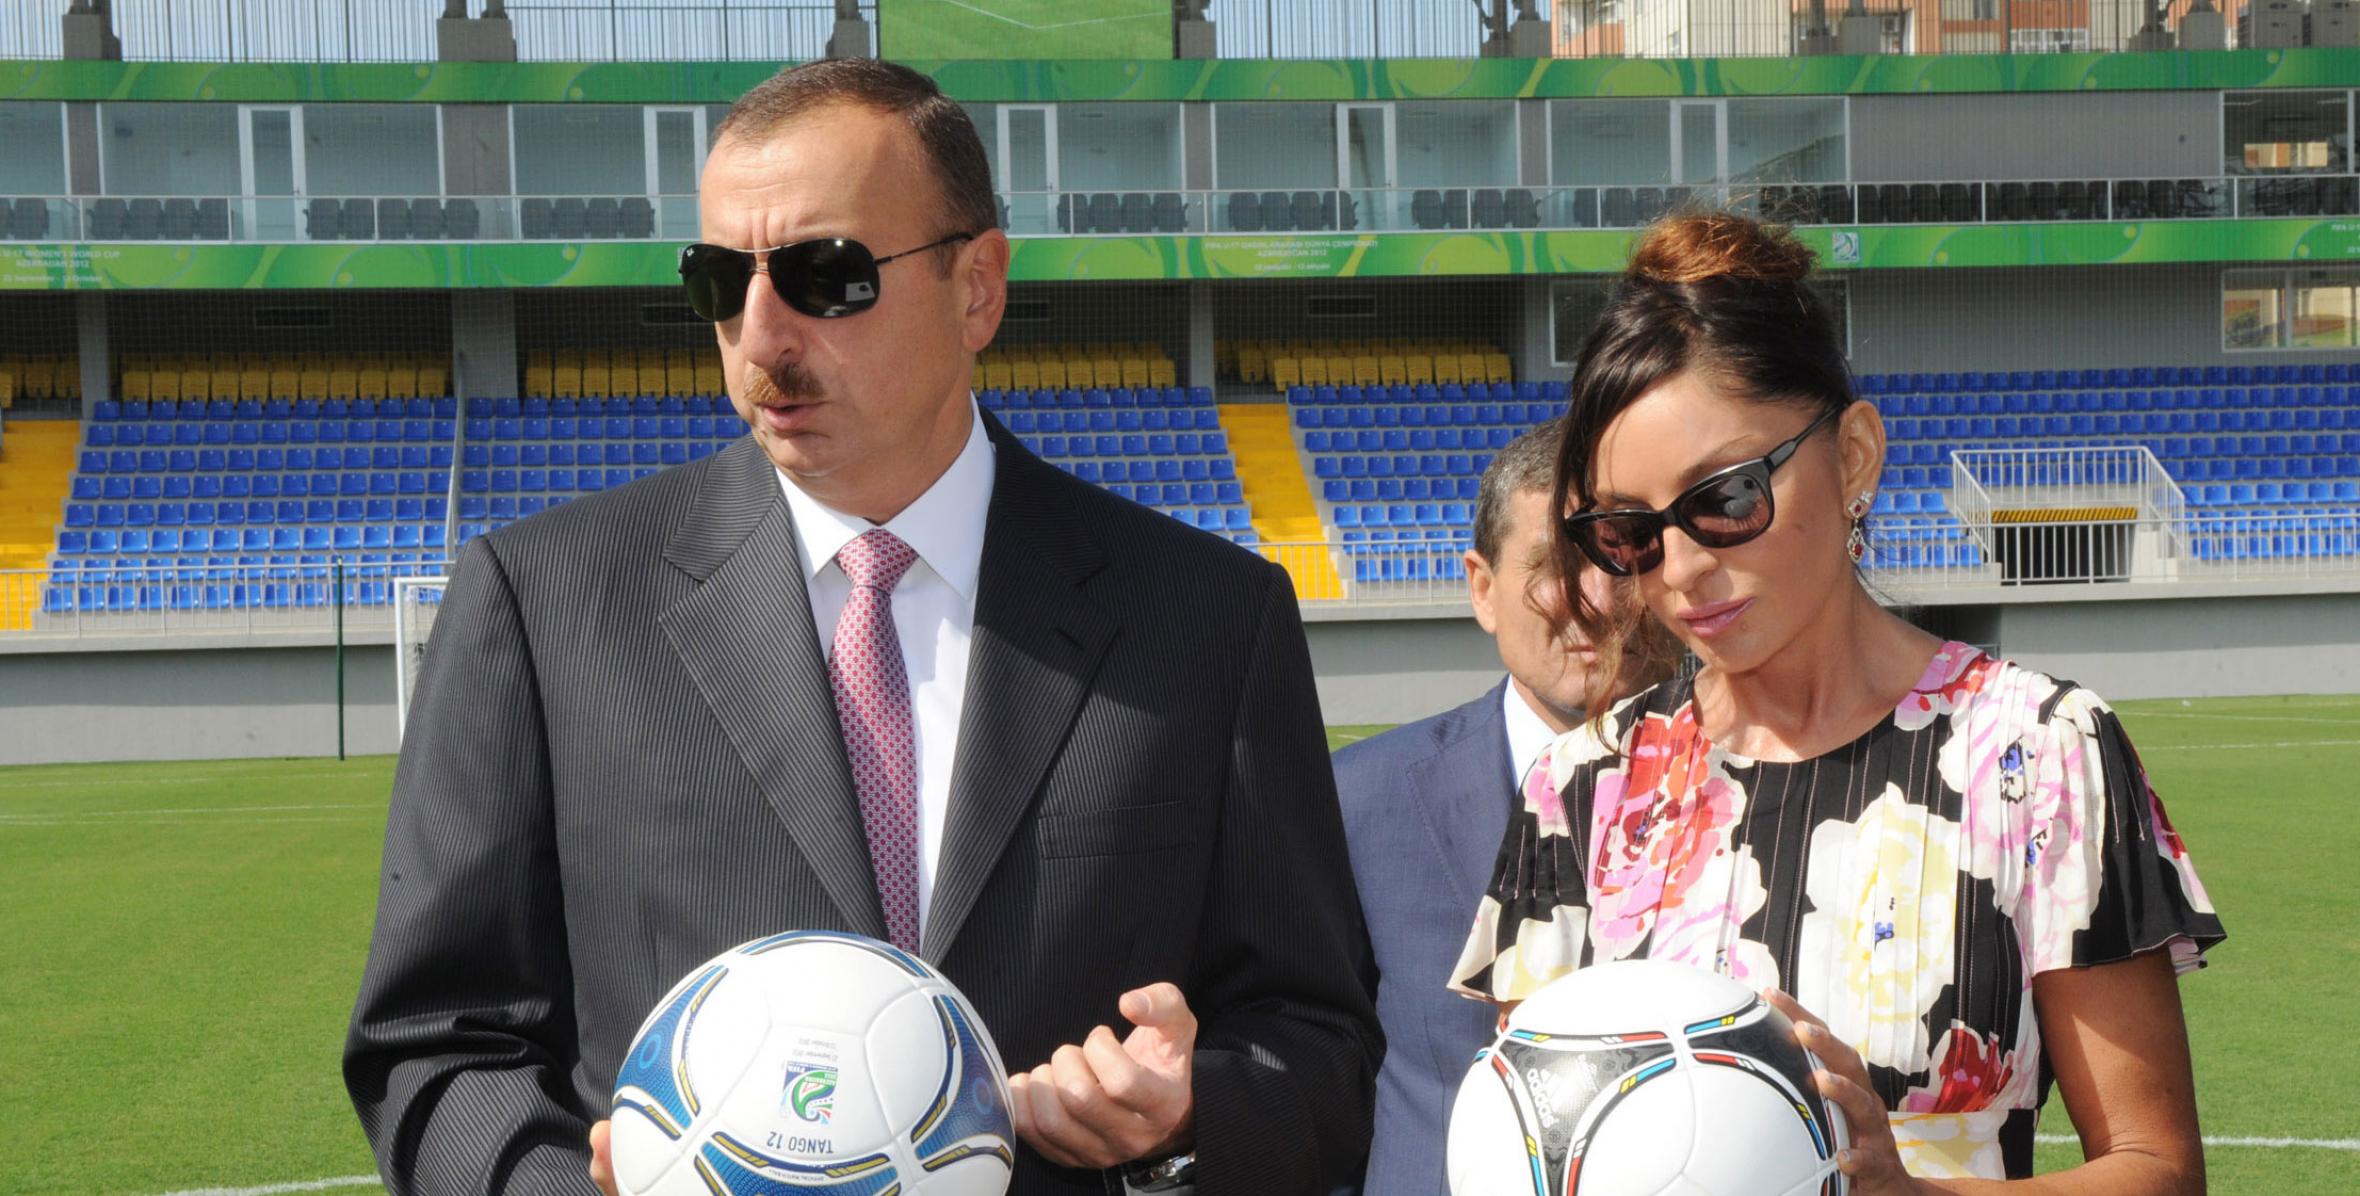 Ilham Aliyev attended the opening of the “8th km” stadium in Baku